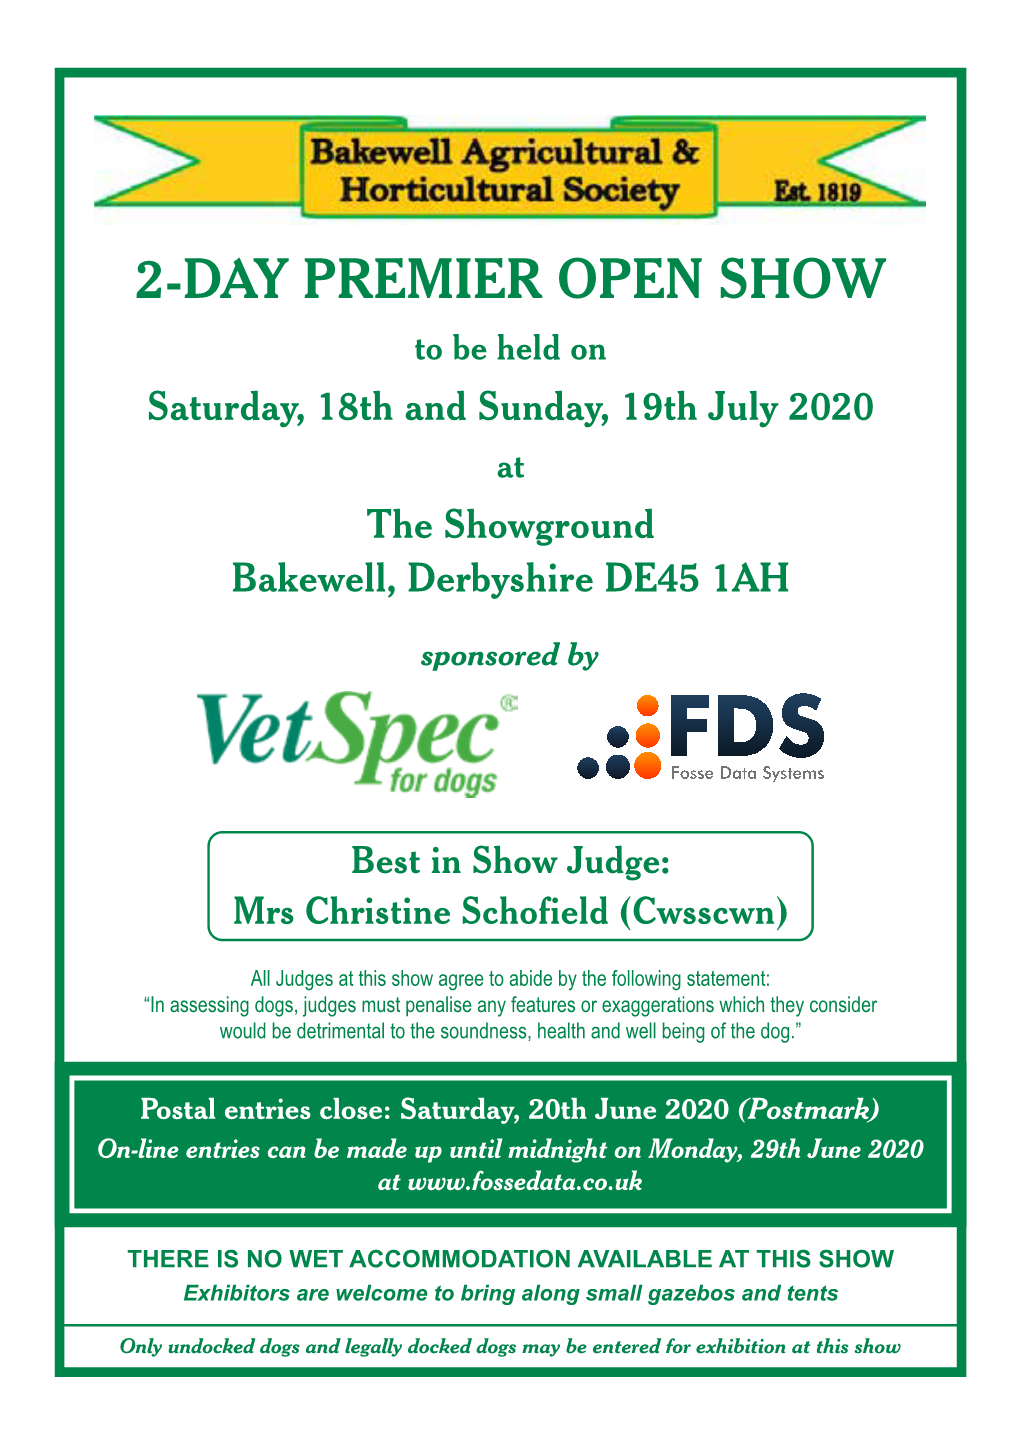 2-DAY PREMIER OPEN SHOW to Be Held on Saturday, 18Th and Sunday, 19Th July 2020 at the Showground Bakewell, Derbyshire DE45 1AH